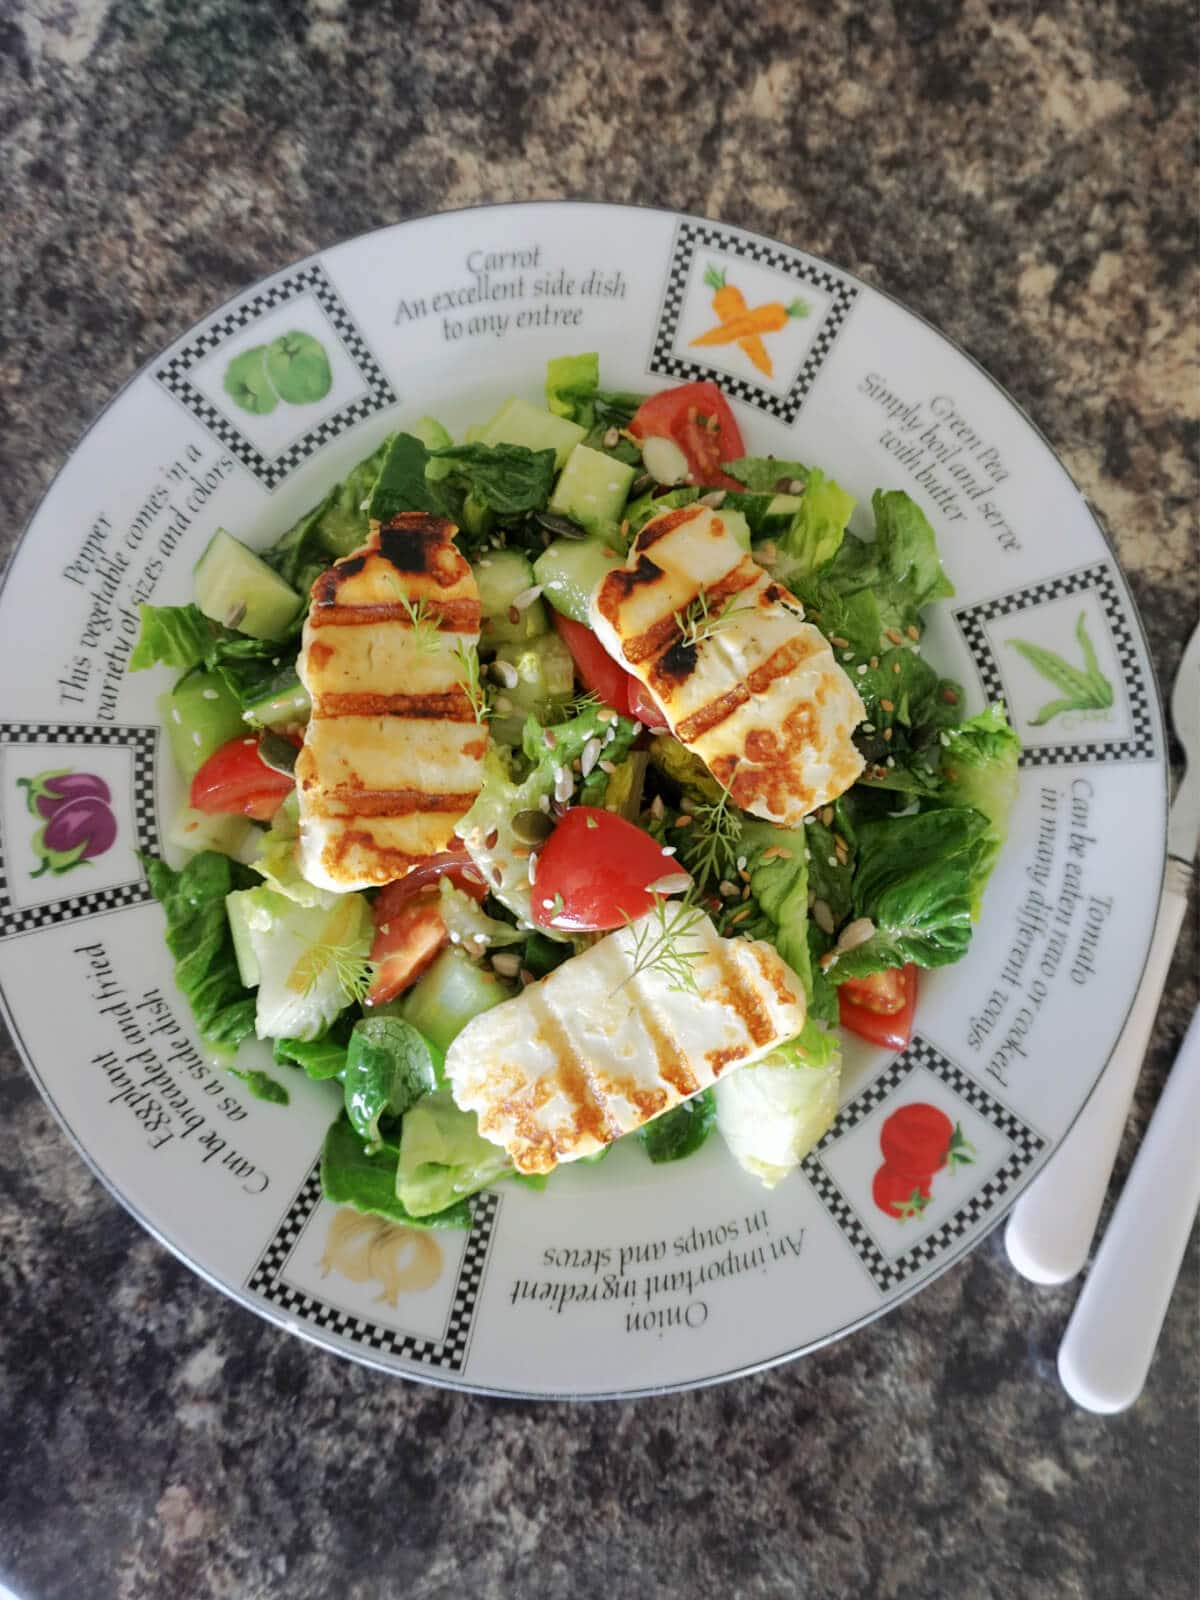 Overhead shot of a plate with grilled halloumi with salad.